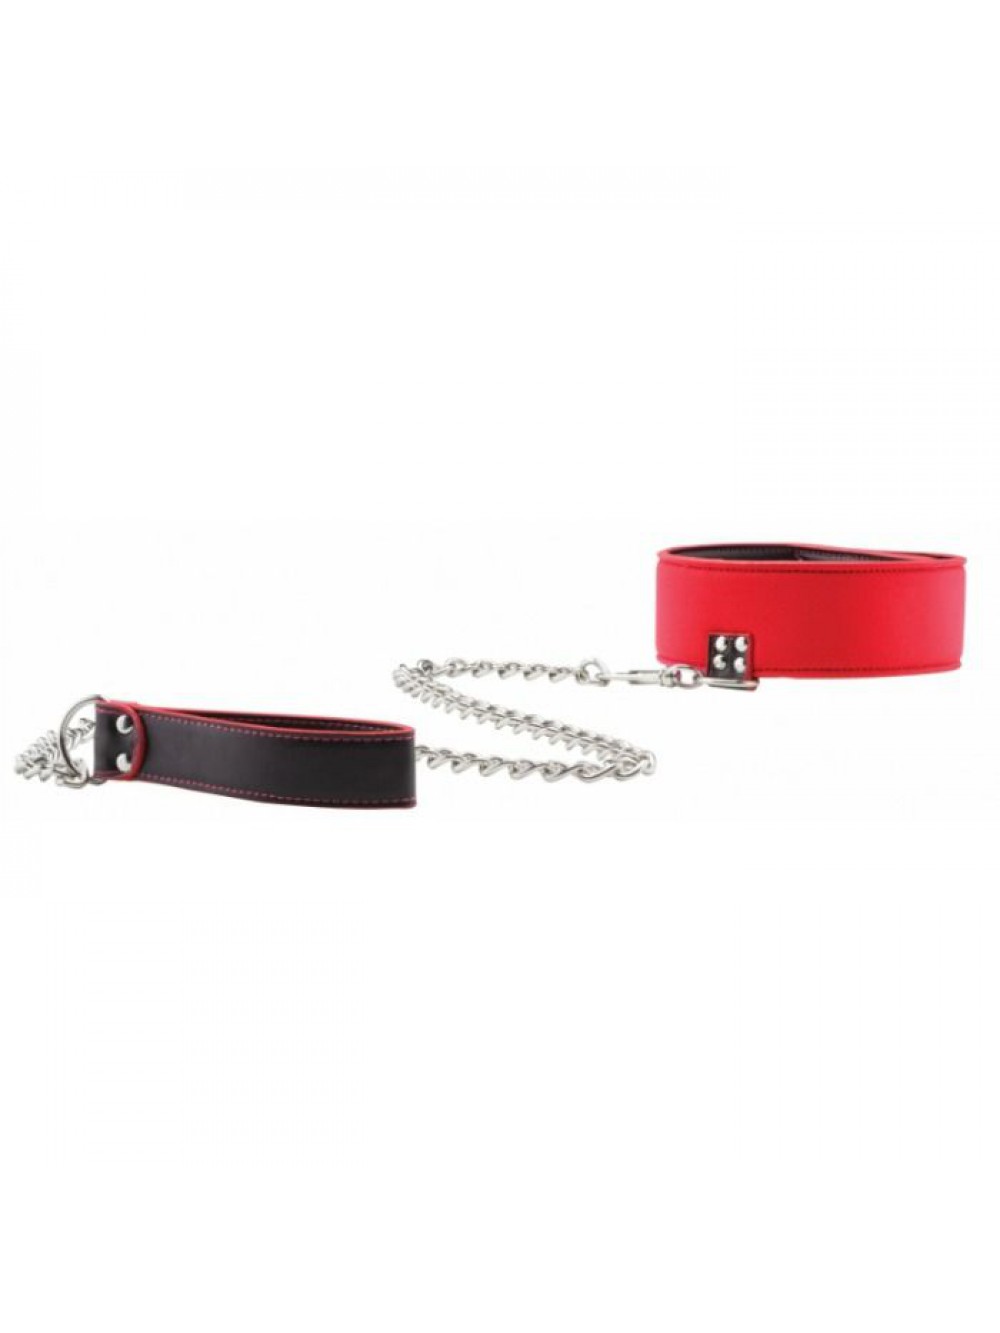 REVERSIBLE COLLAR WITH LEASH- RED 8714273786555